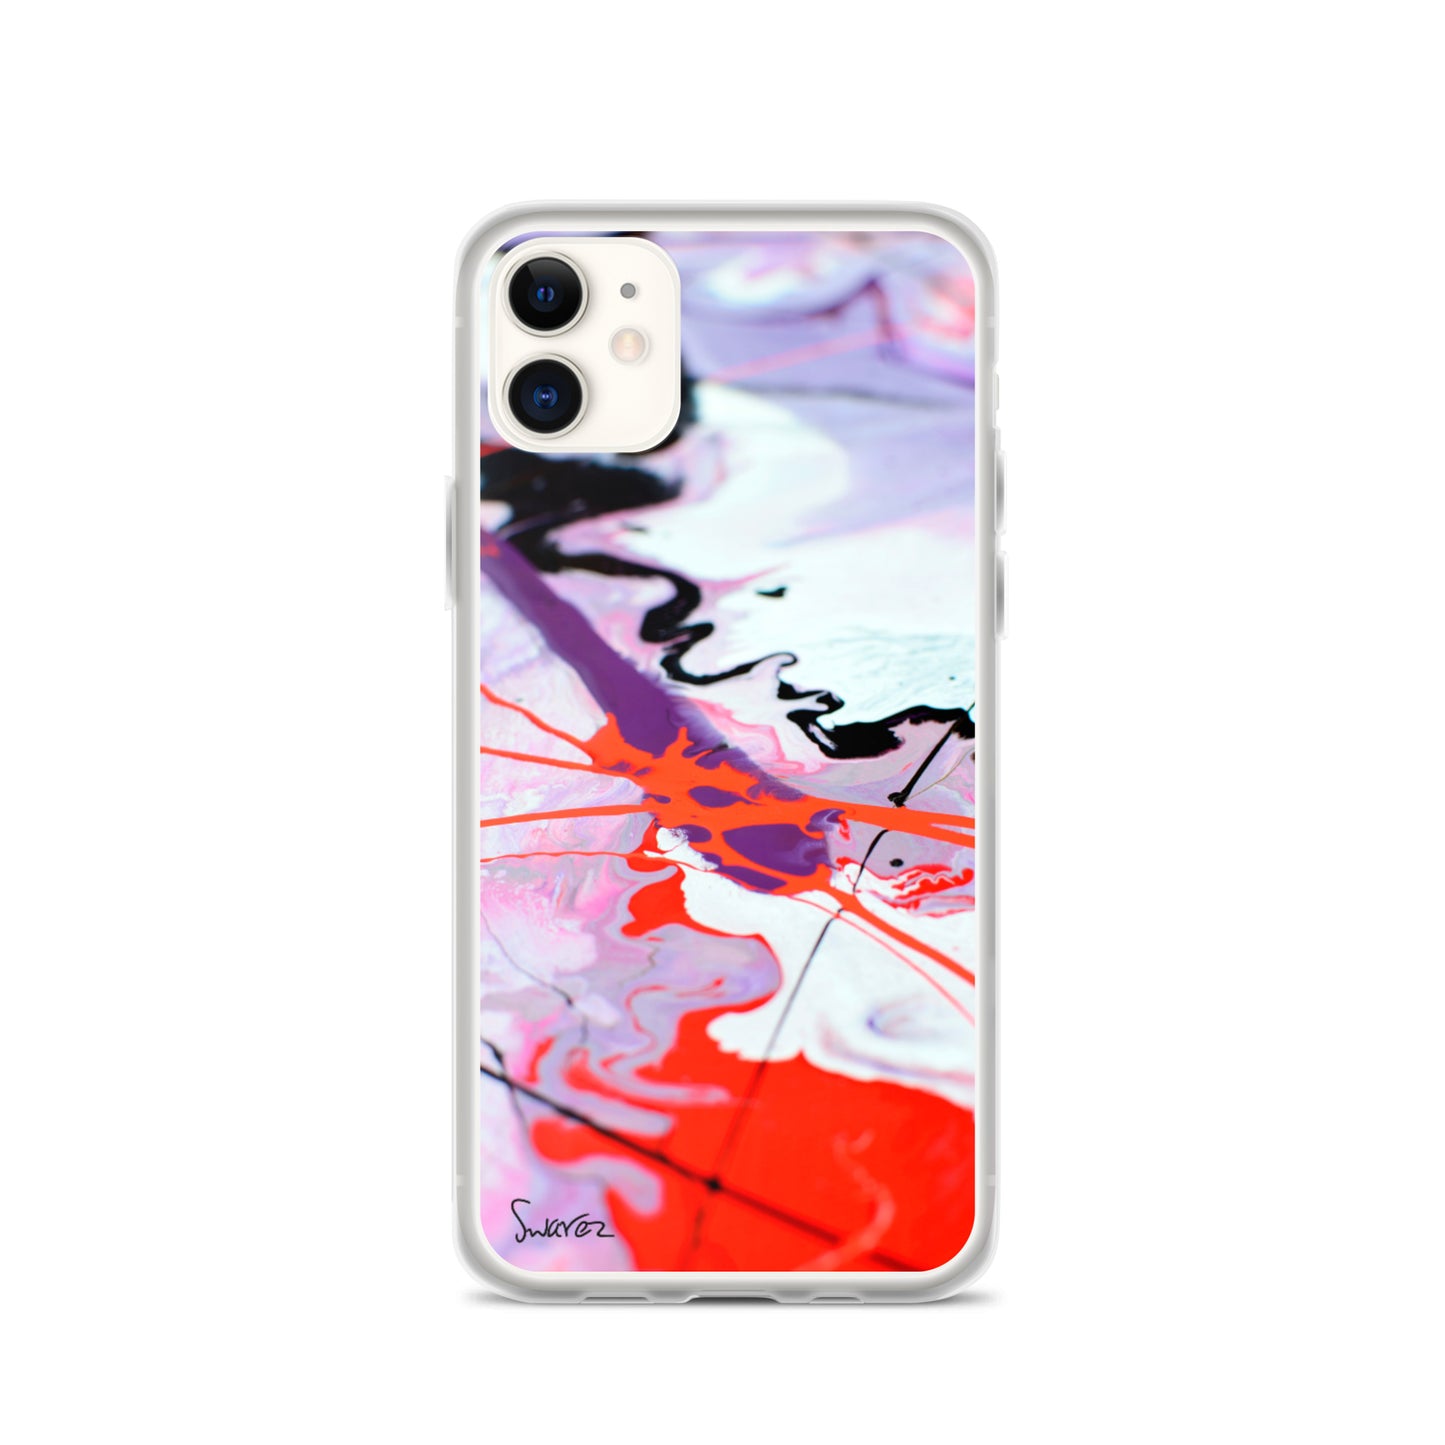 iPhone Case - Pink and red design